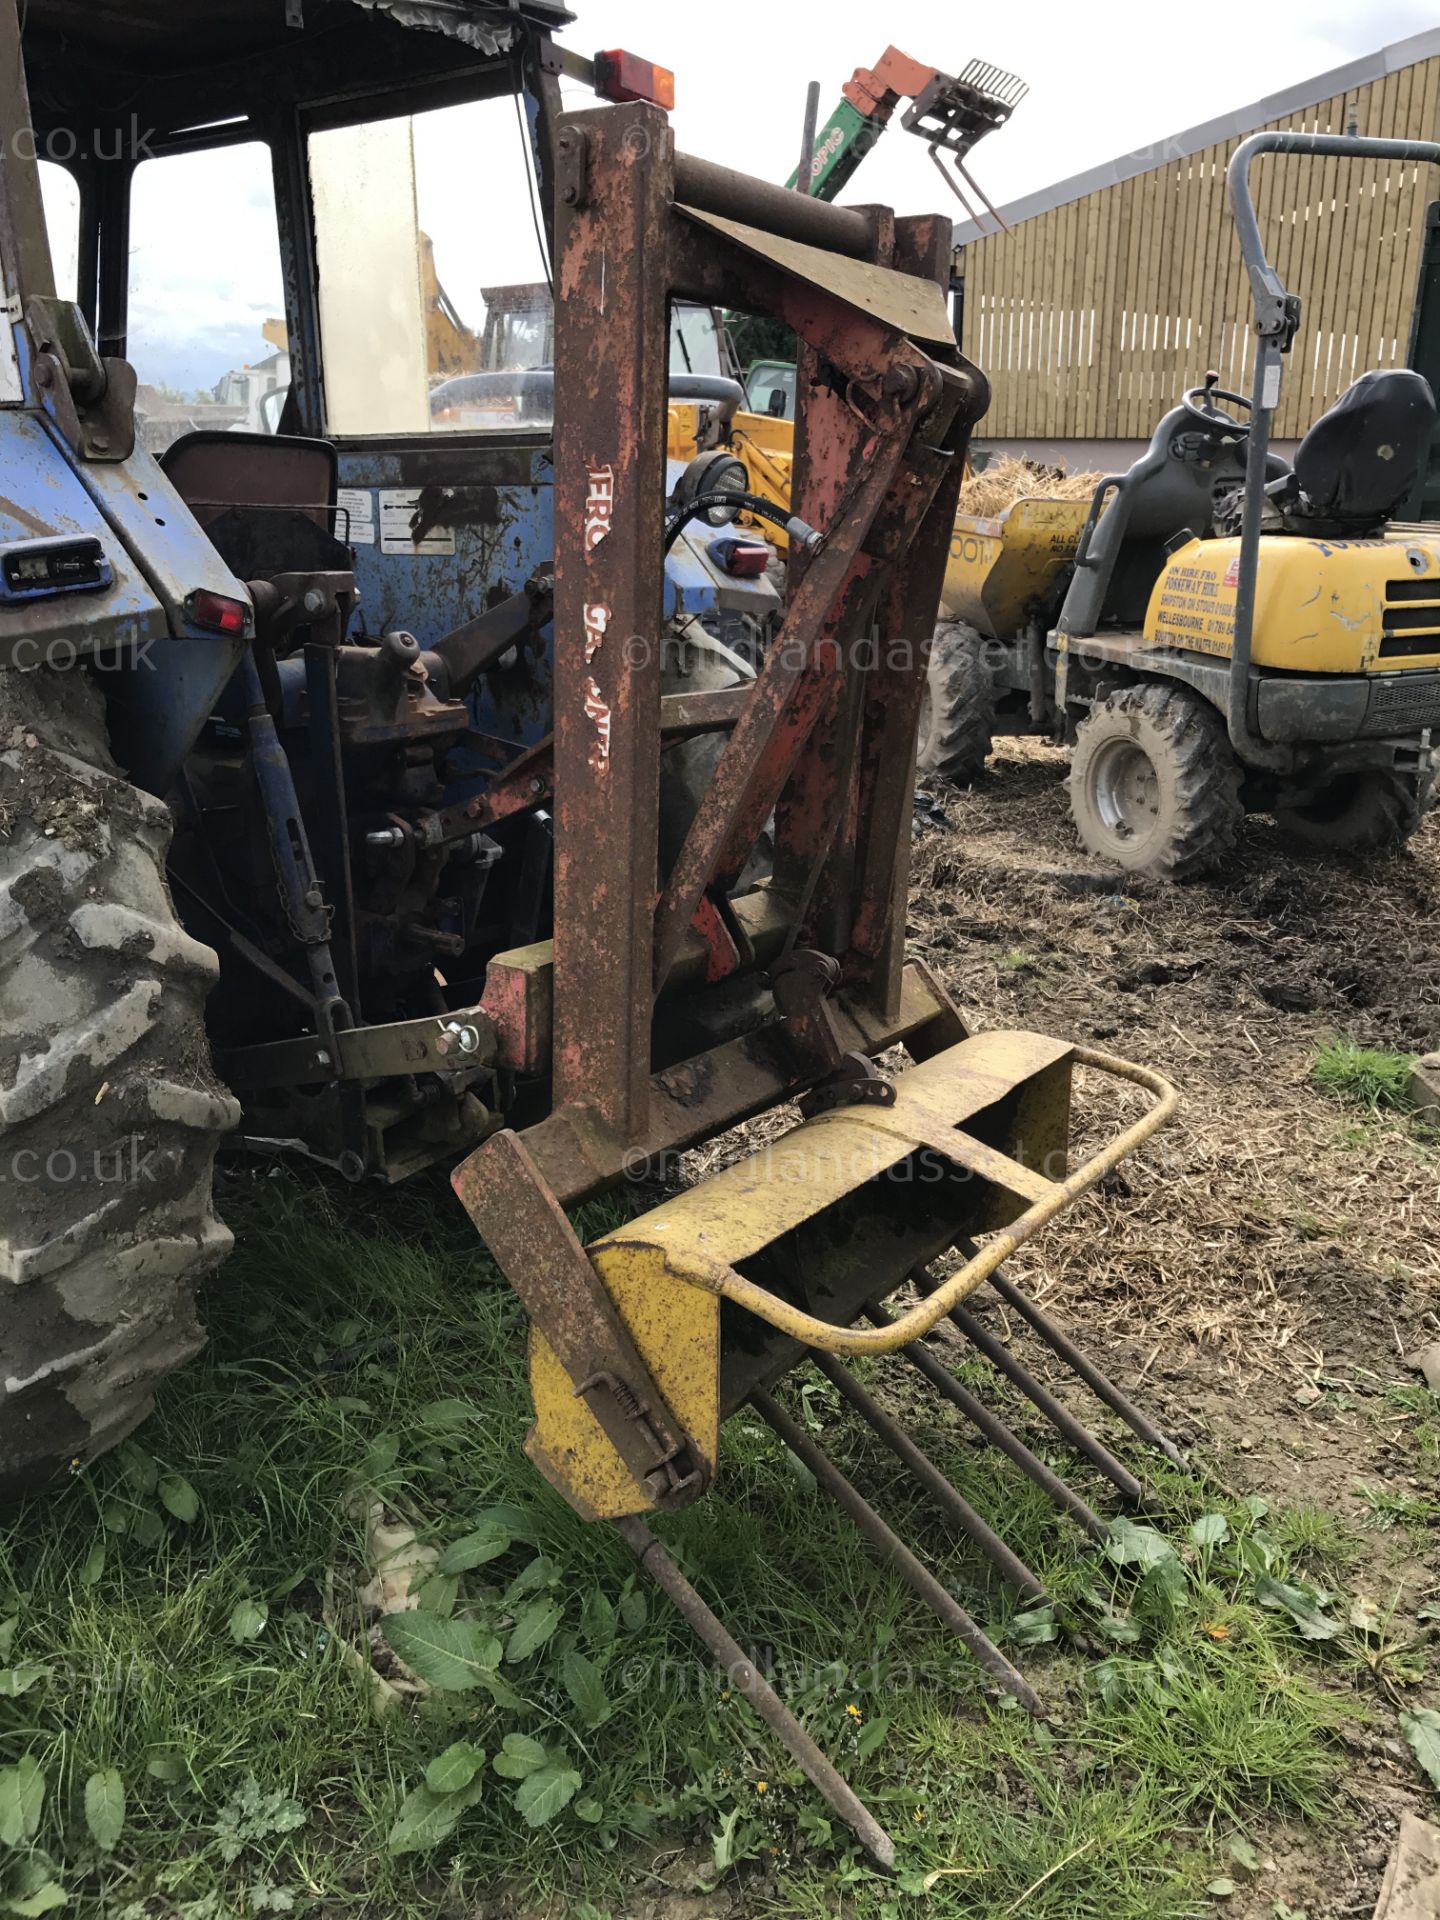 DS - LEYLAND 255 TRACTOR BACK END LOADER   YEAR UNKNOWN FITTED WITH A BACK END LOADER GOOD WORKING - Image 6 of 6